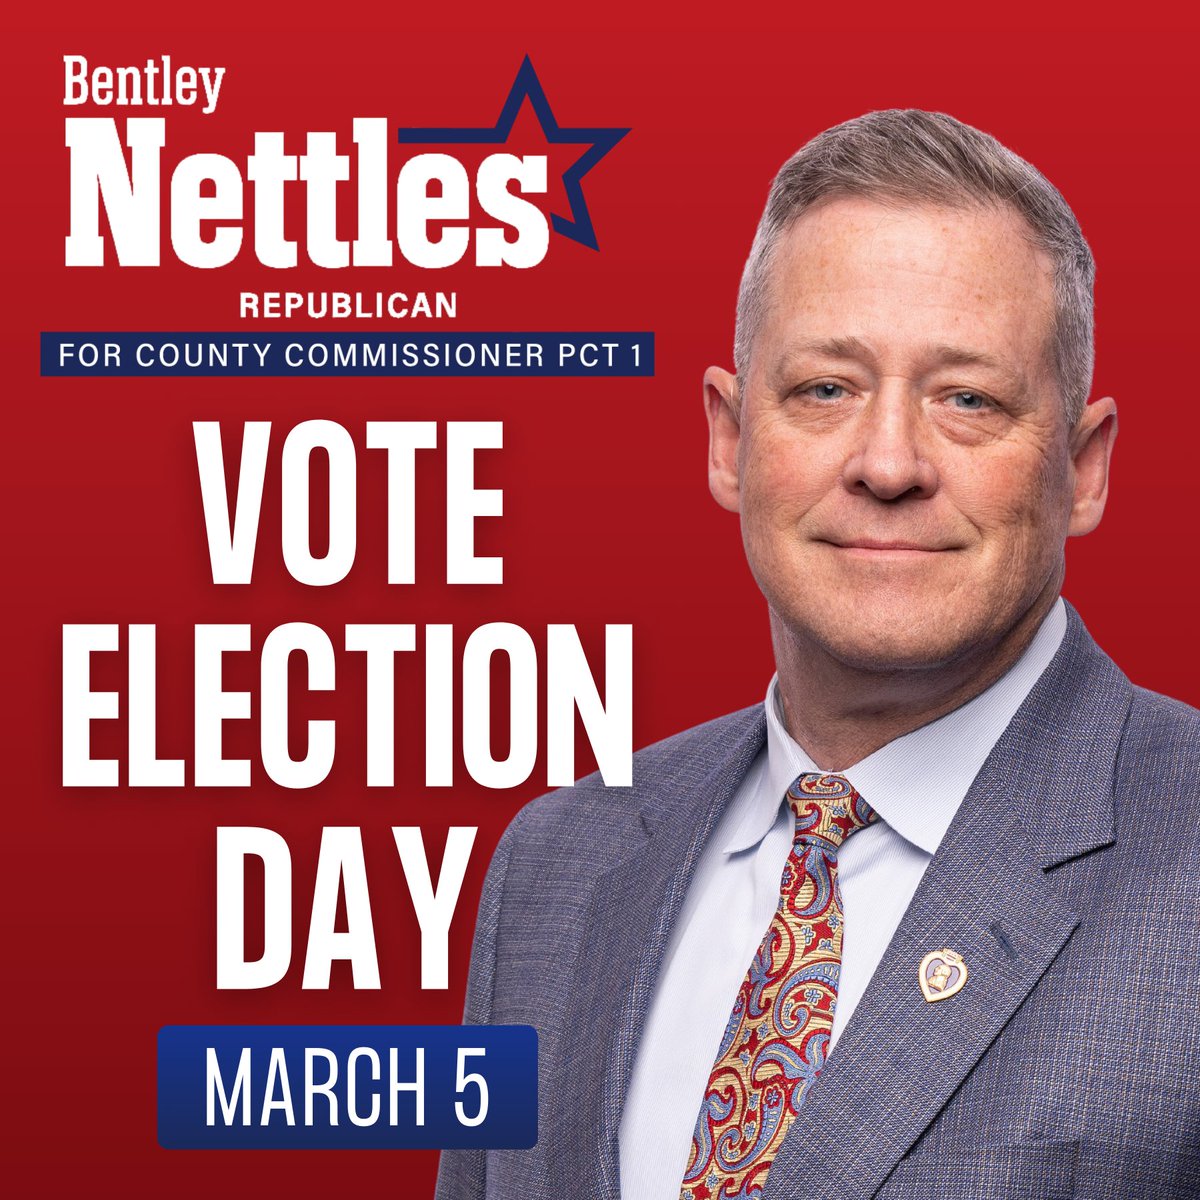 I’m running for Brazos County Commissioner Pct. 1 to save taxpayers money, strengthen our infrastructure, and automate our systems. Today is Election Day, and I’d be honored to have your vote.

Find your polling place: bentleynettles.com/election-day

#VoteTexas